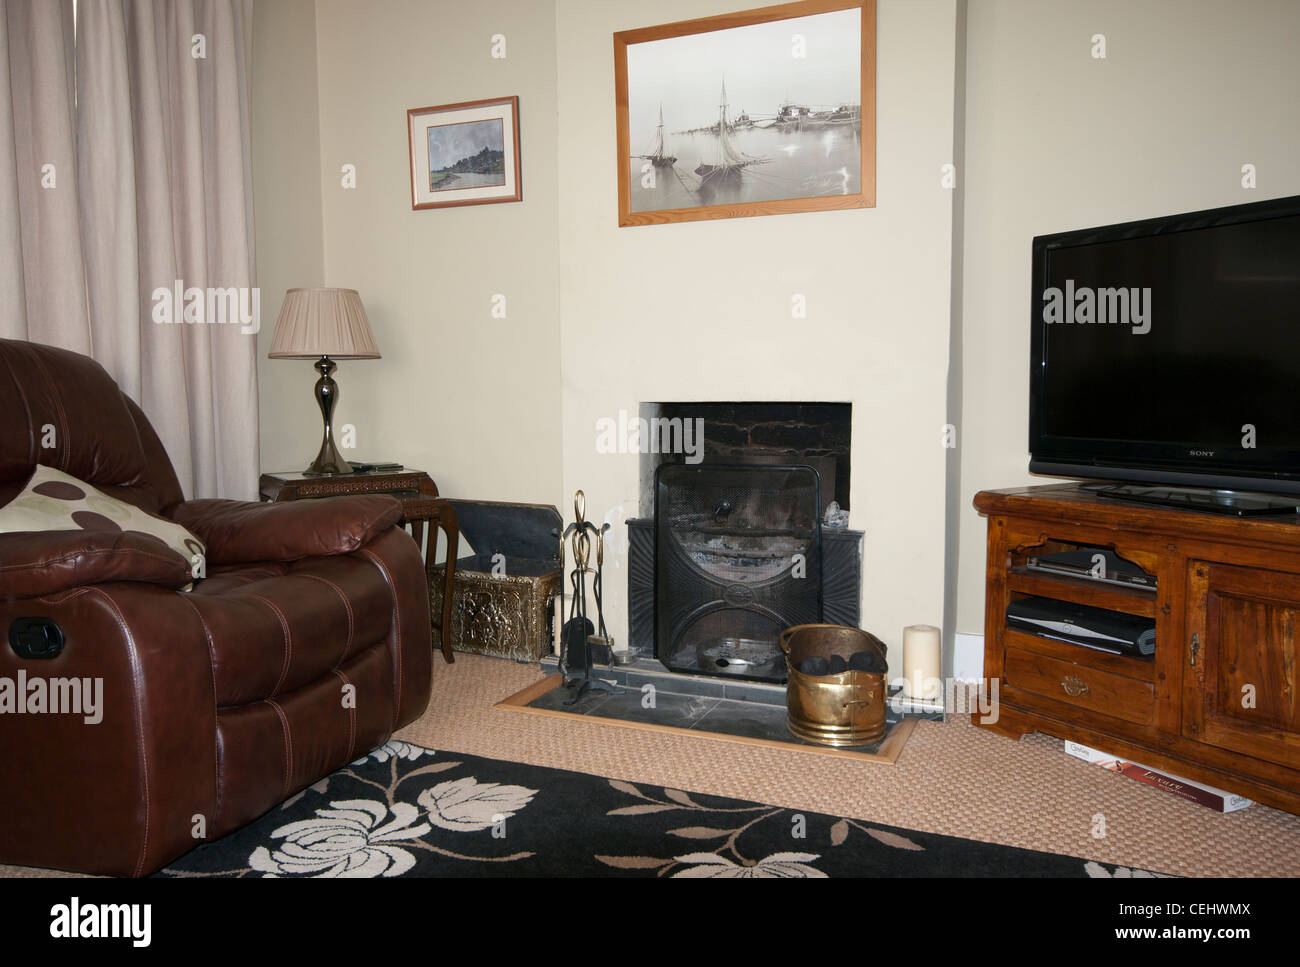 Living Room Lounge In A House With A Leather Armchair Open Fire and a Flat Screen TV Stock Photo